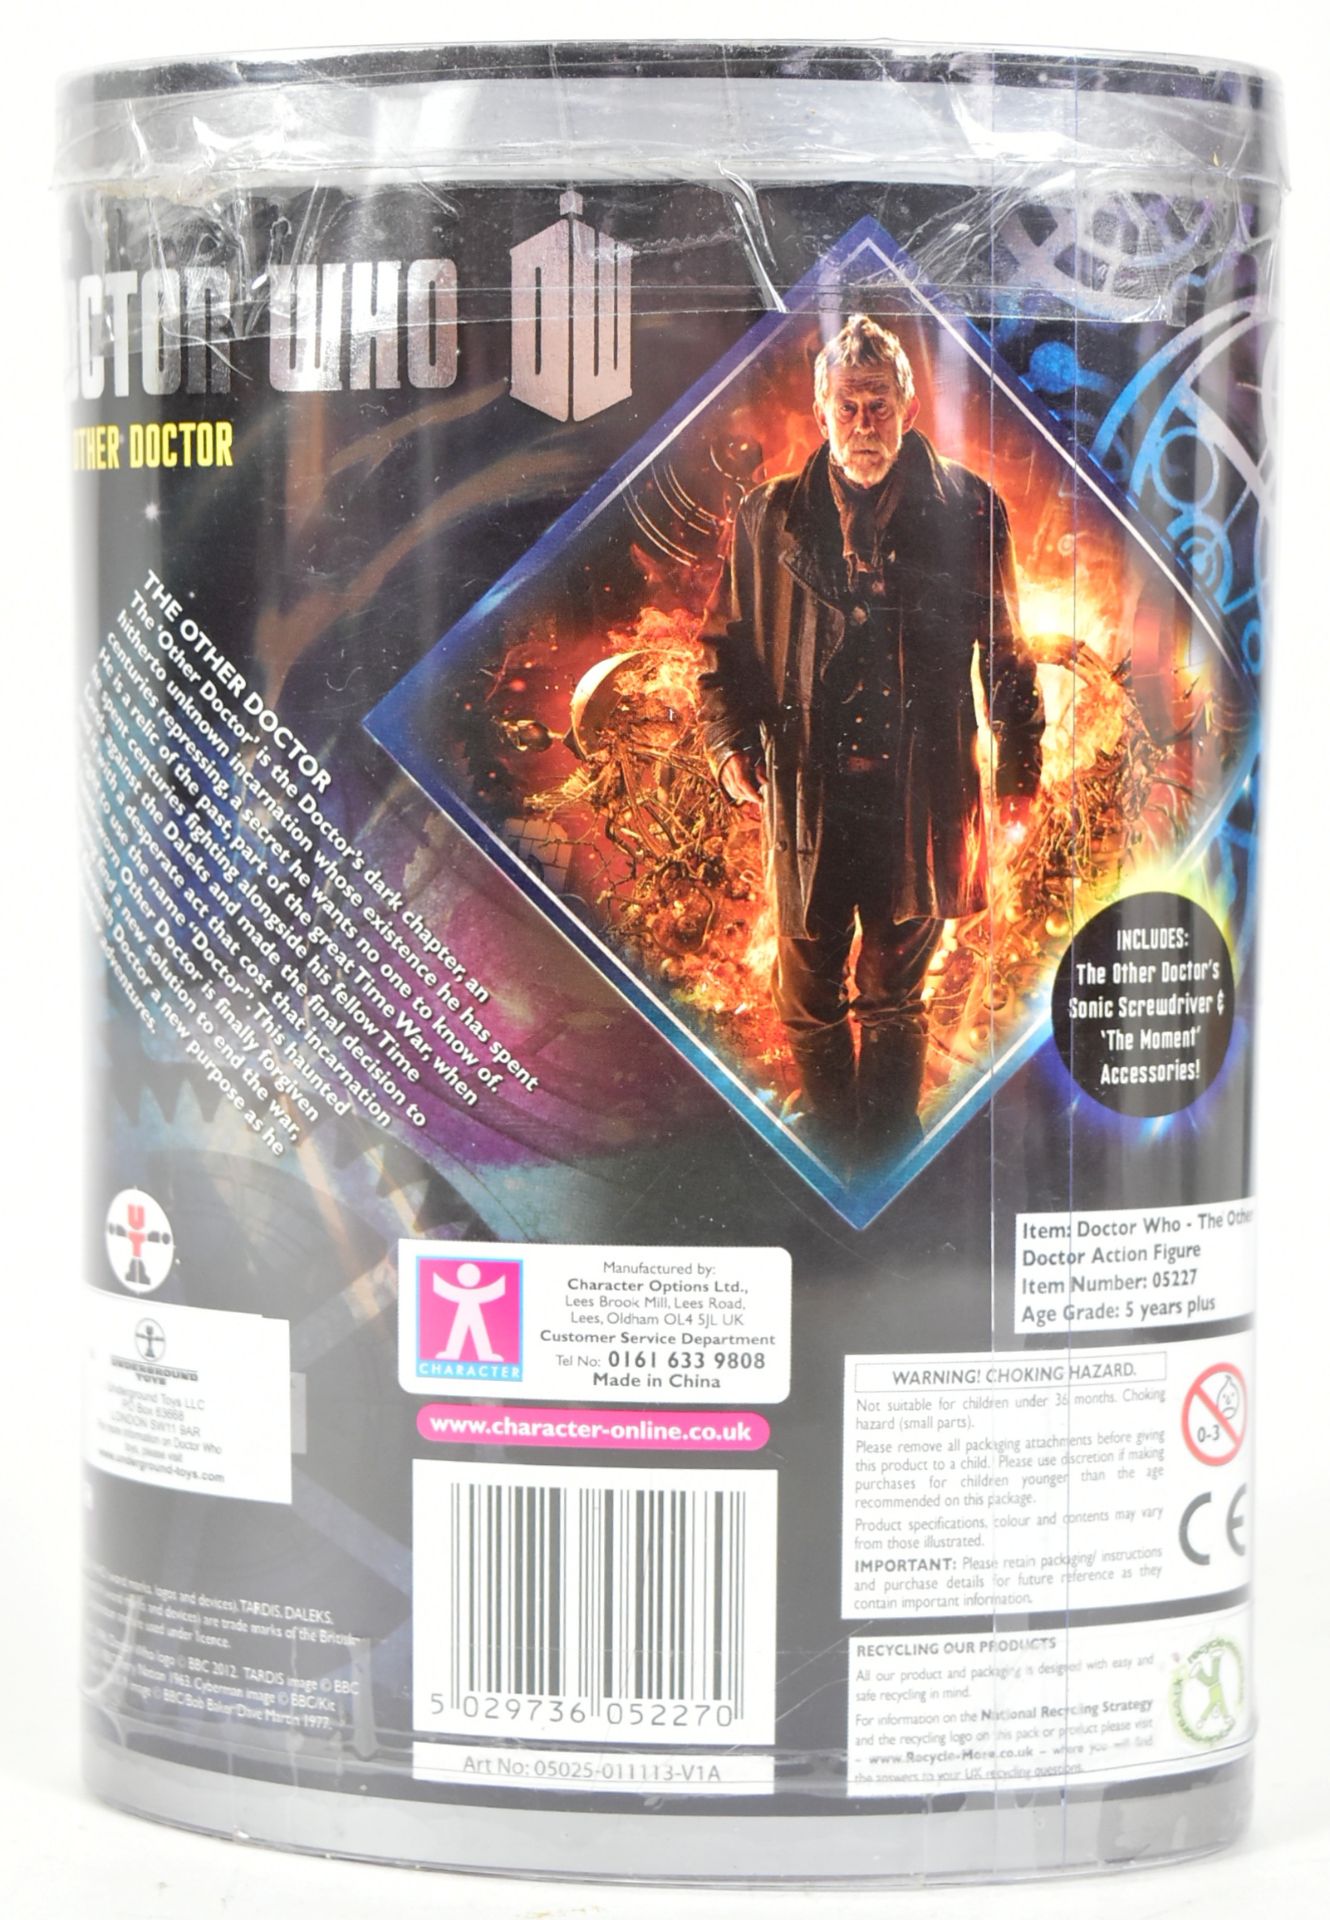 DOCTOR WHO - UNDERGROUND TOYS - THE OTHER DOCTOR - Image 3 of 3